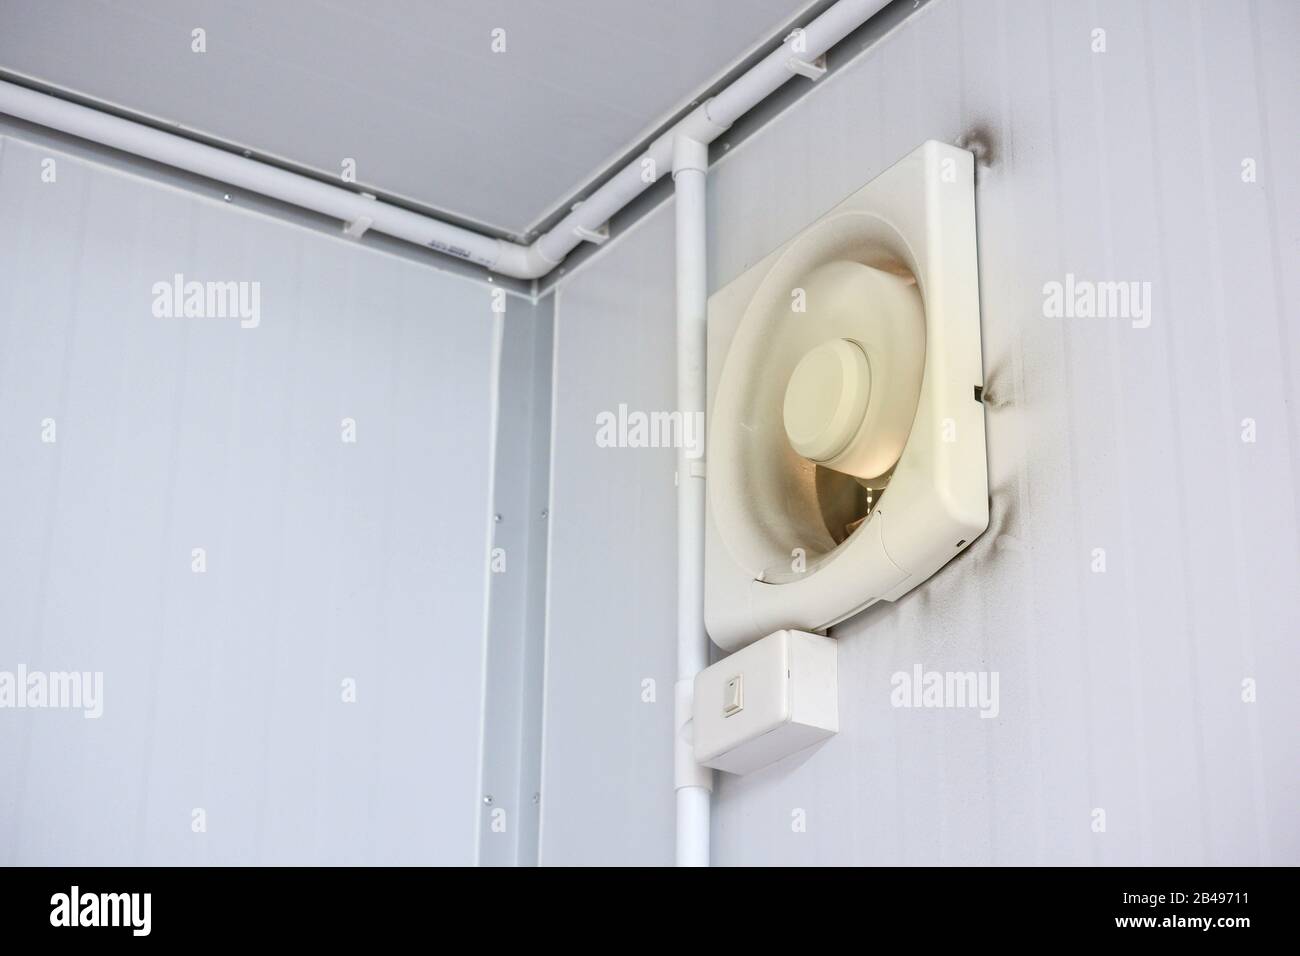 Stove Exhaust Fan Extractor Filter Maintenance Stock Photo